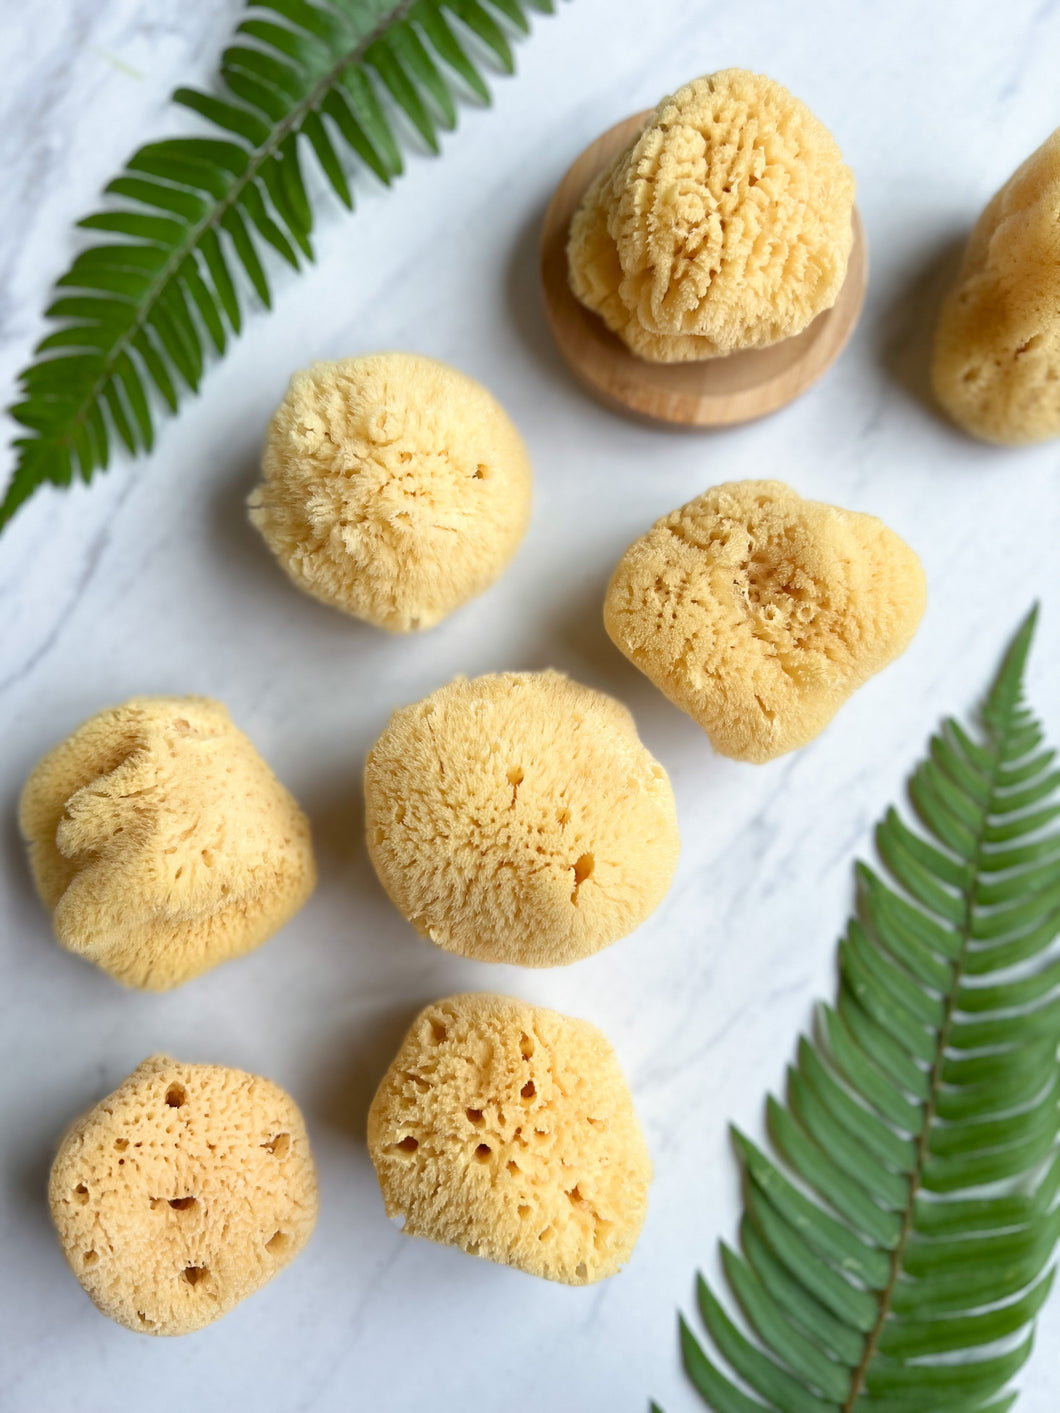 Silk Facial Sea Sponge Caribbean | Fawn Lily Botanica - Sustainable and renewable, these soft natural sea sponges cleanse, exfoliate, and rejuvenate skin.